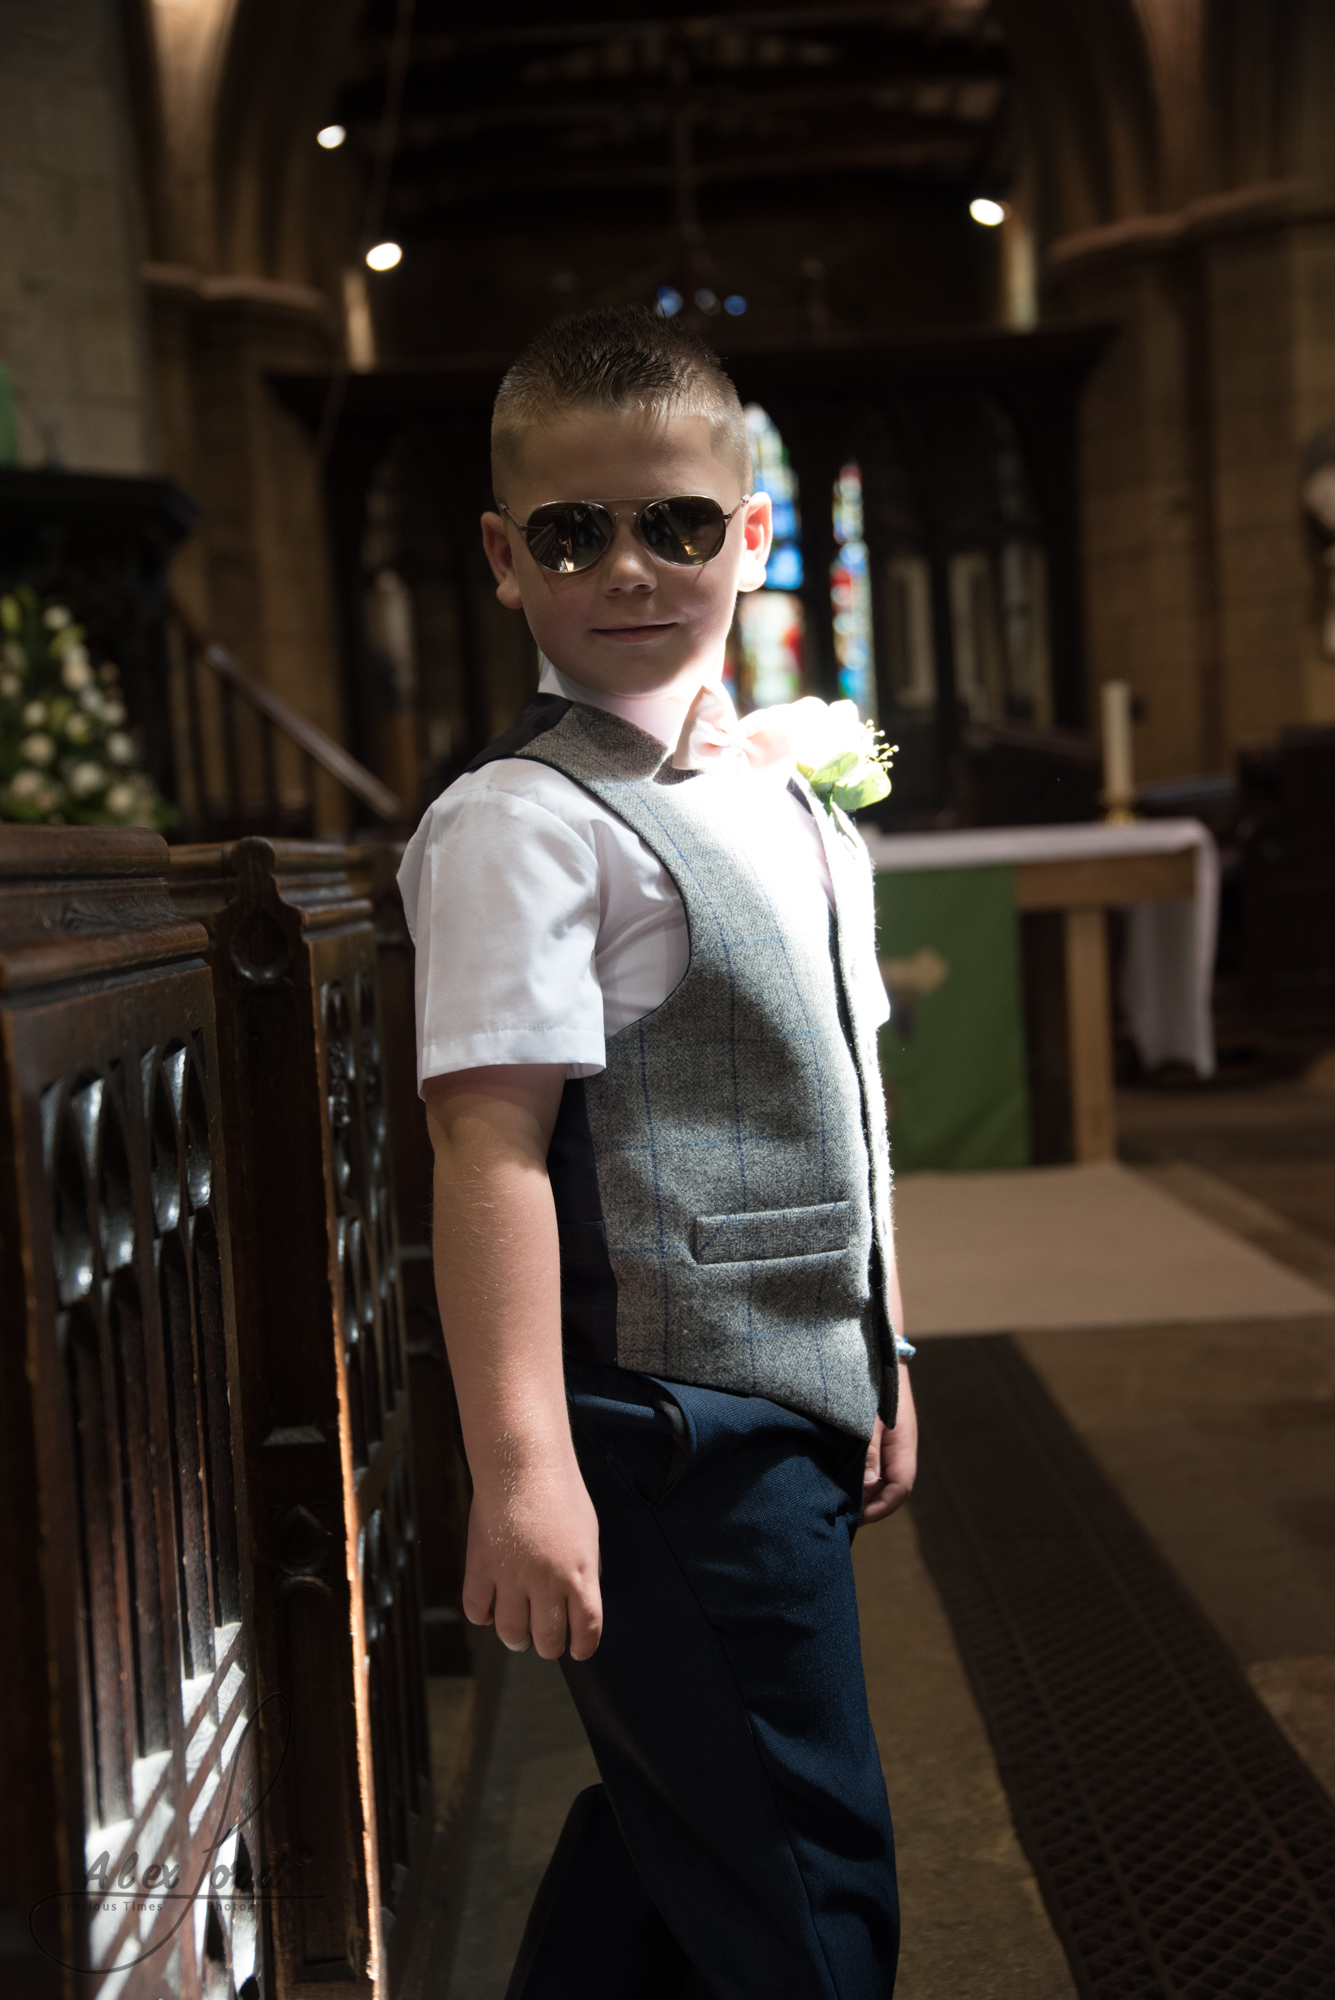 A young usher stands in church and poses for the camera, he’s wearing cool sunglasses